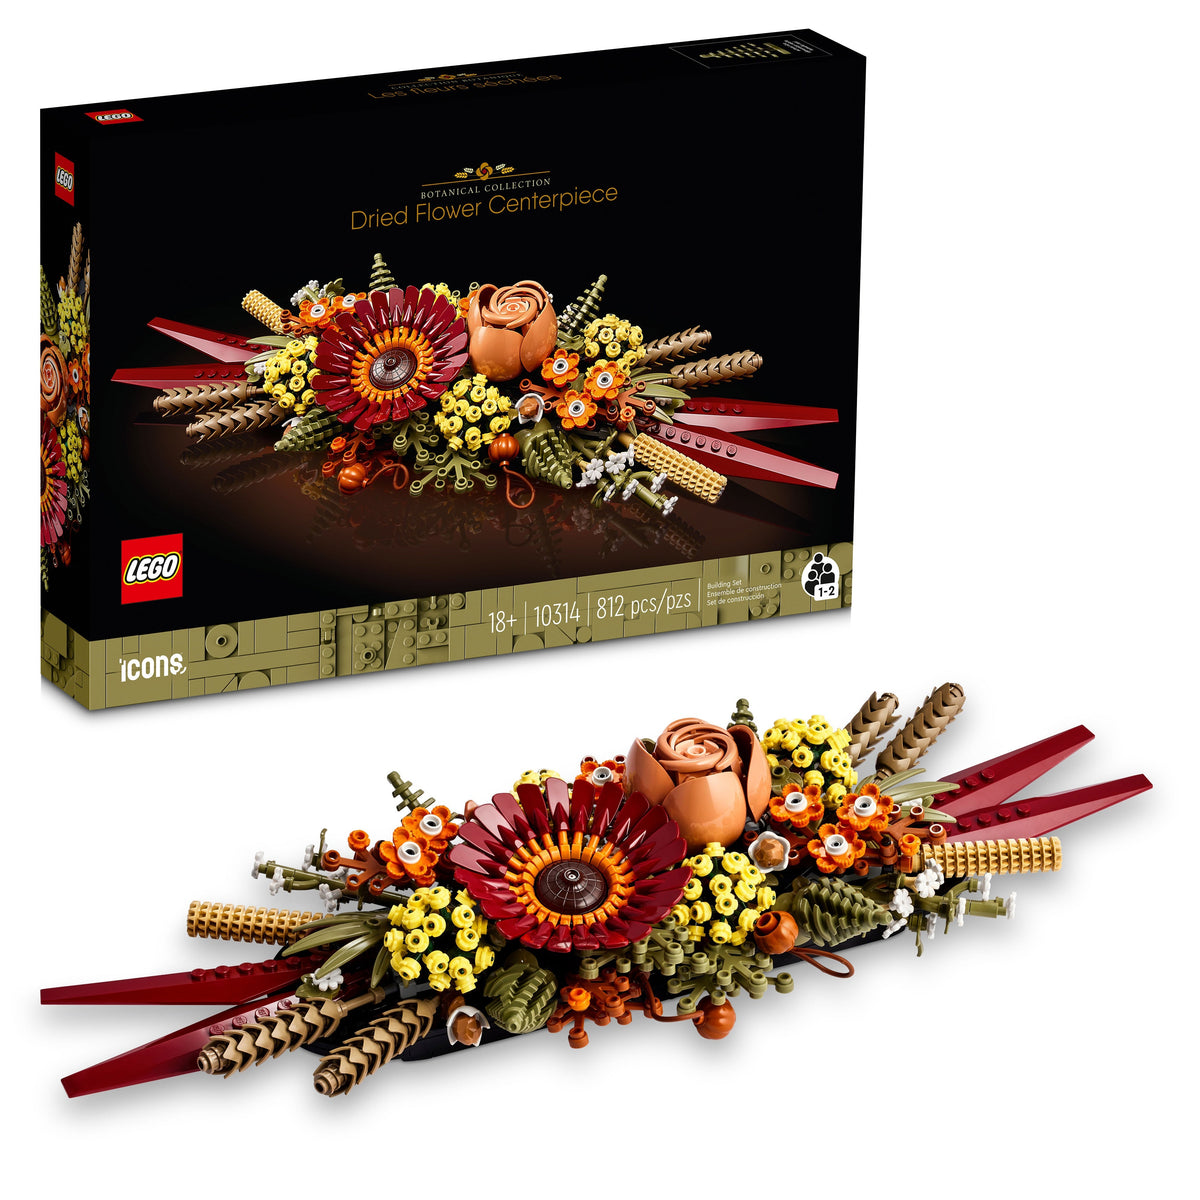 LEGO Toys & Games LEGO Icons Dried Flower Centerpiece, 10314, Ages 18+, 812 Pieces